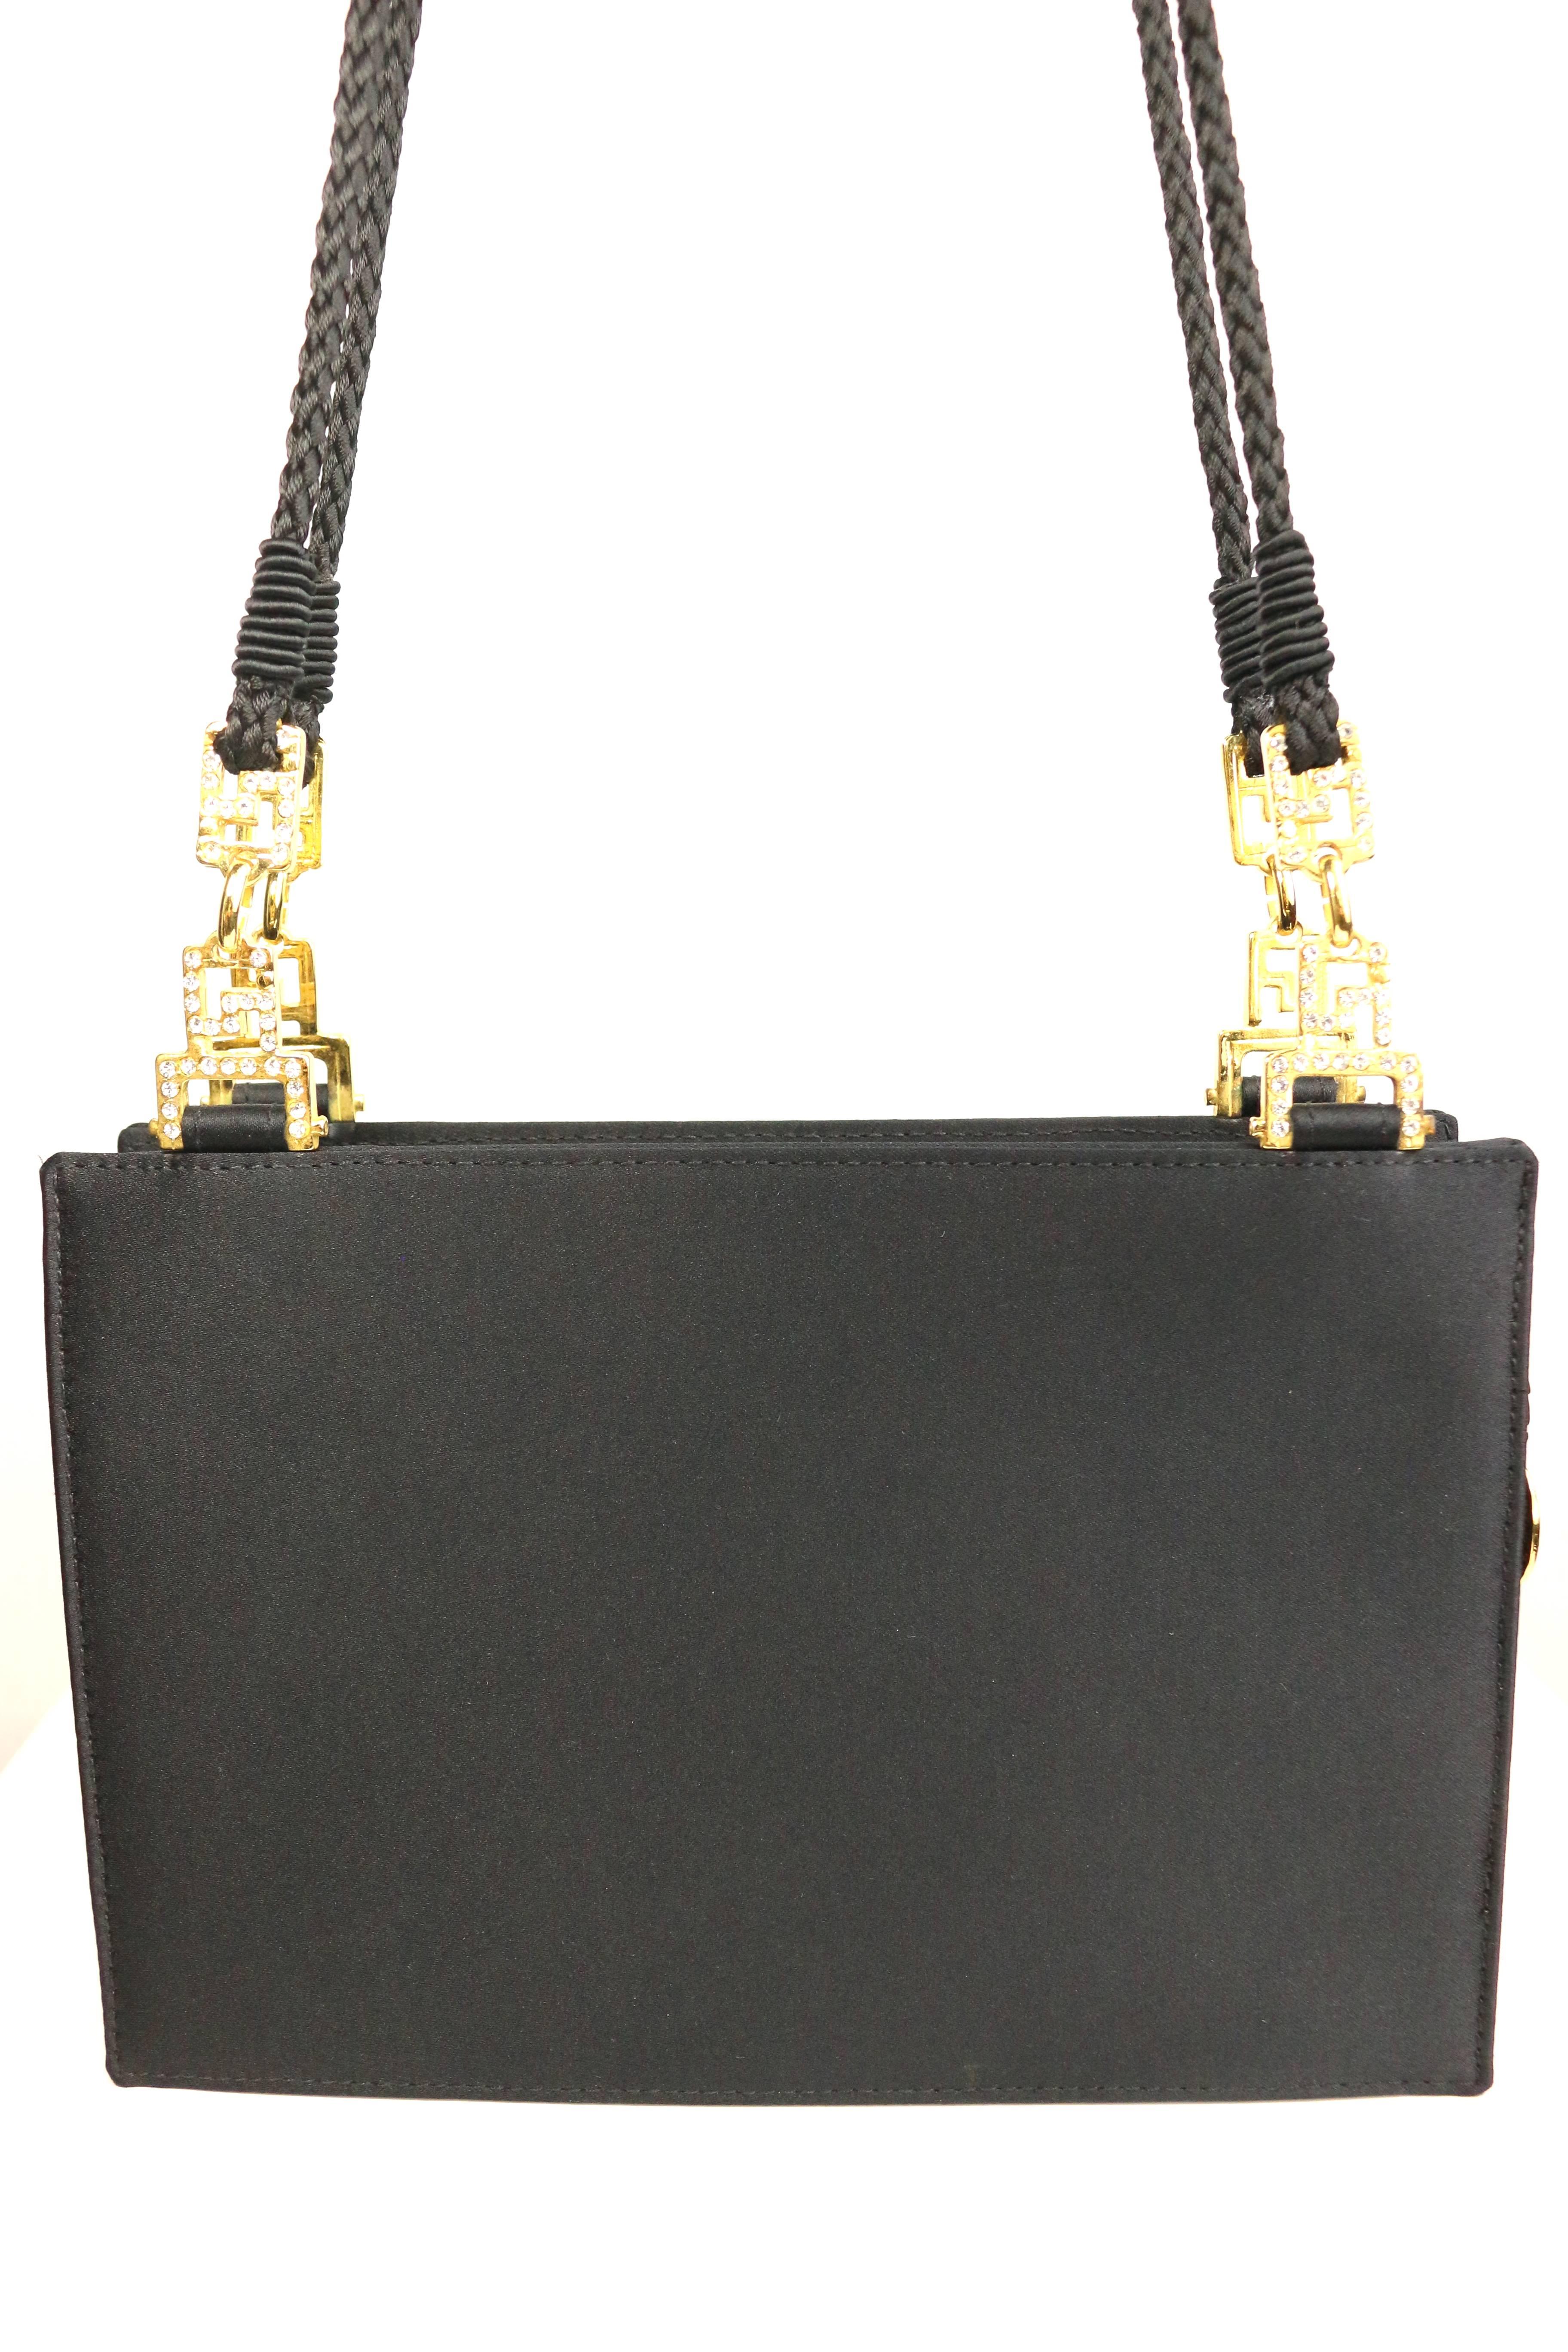 versace black and gold bag